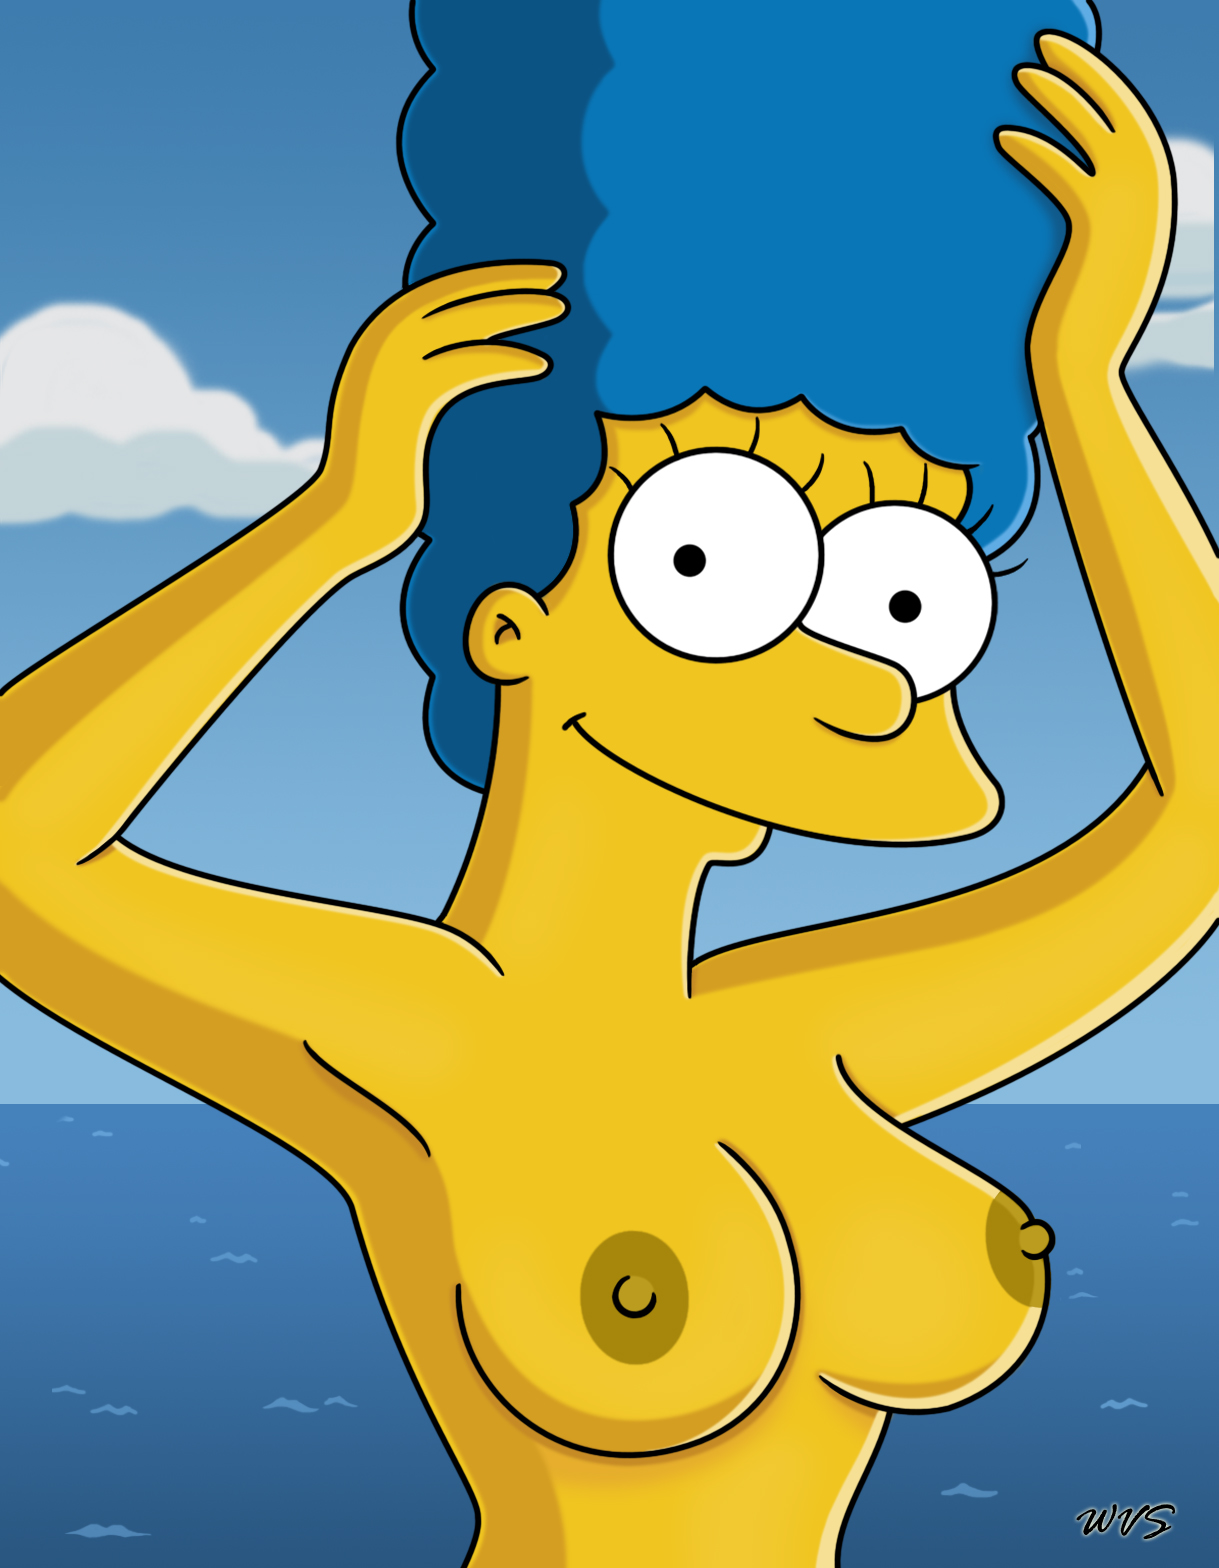 Marge simpson baked